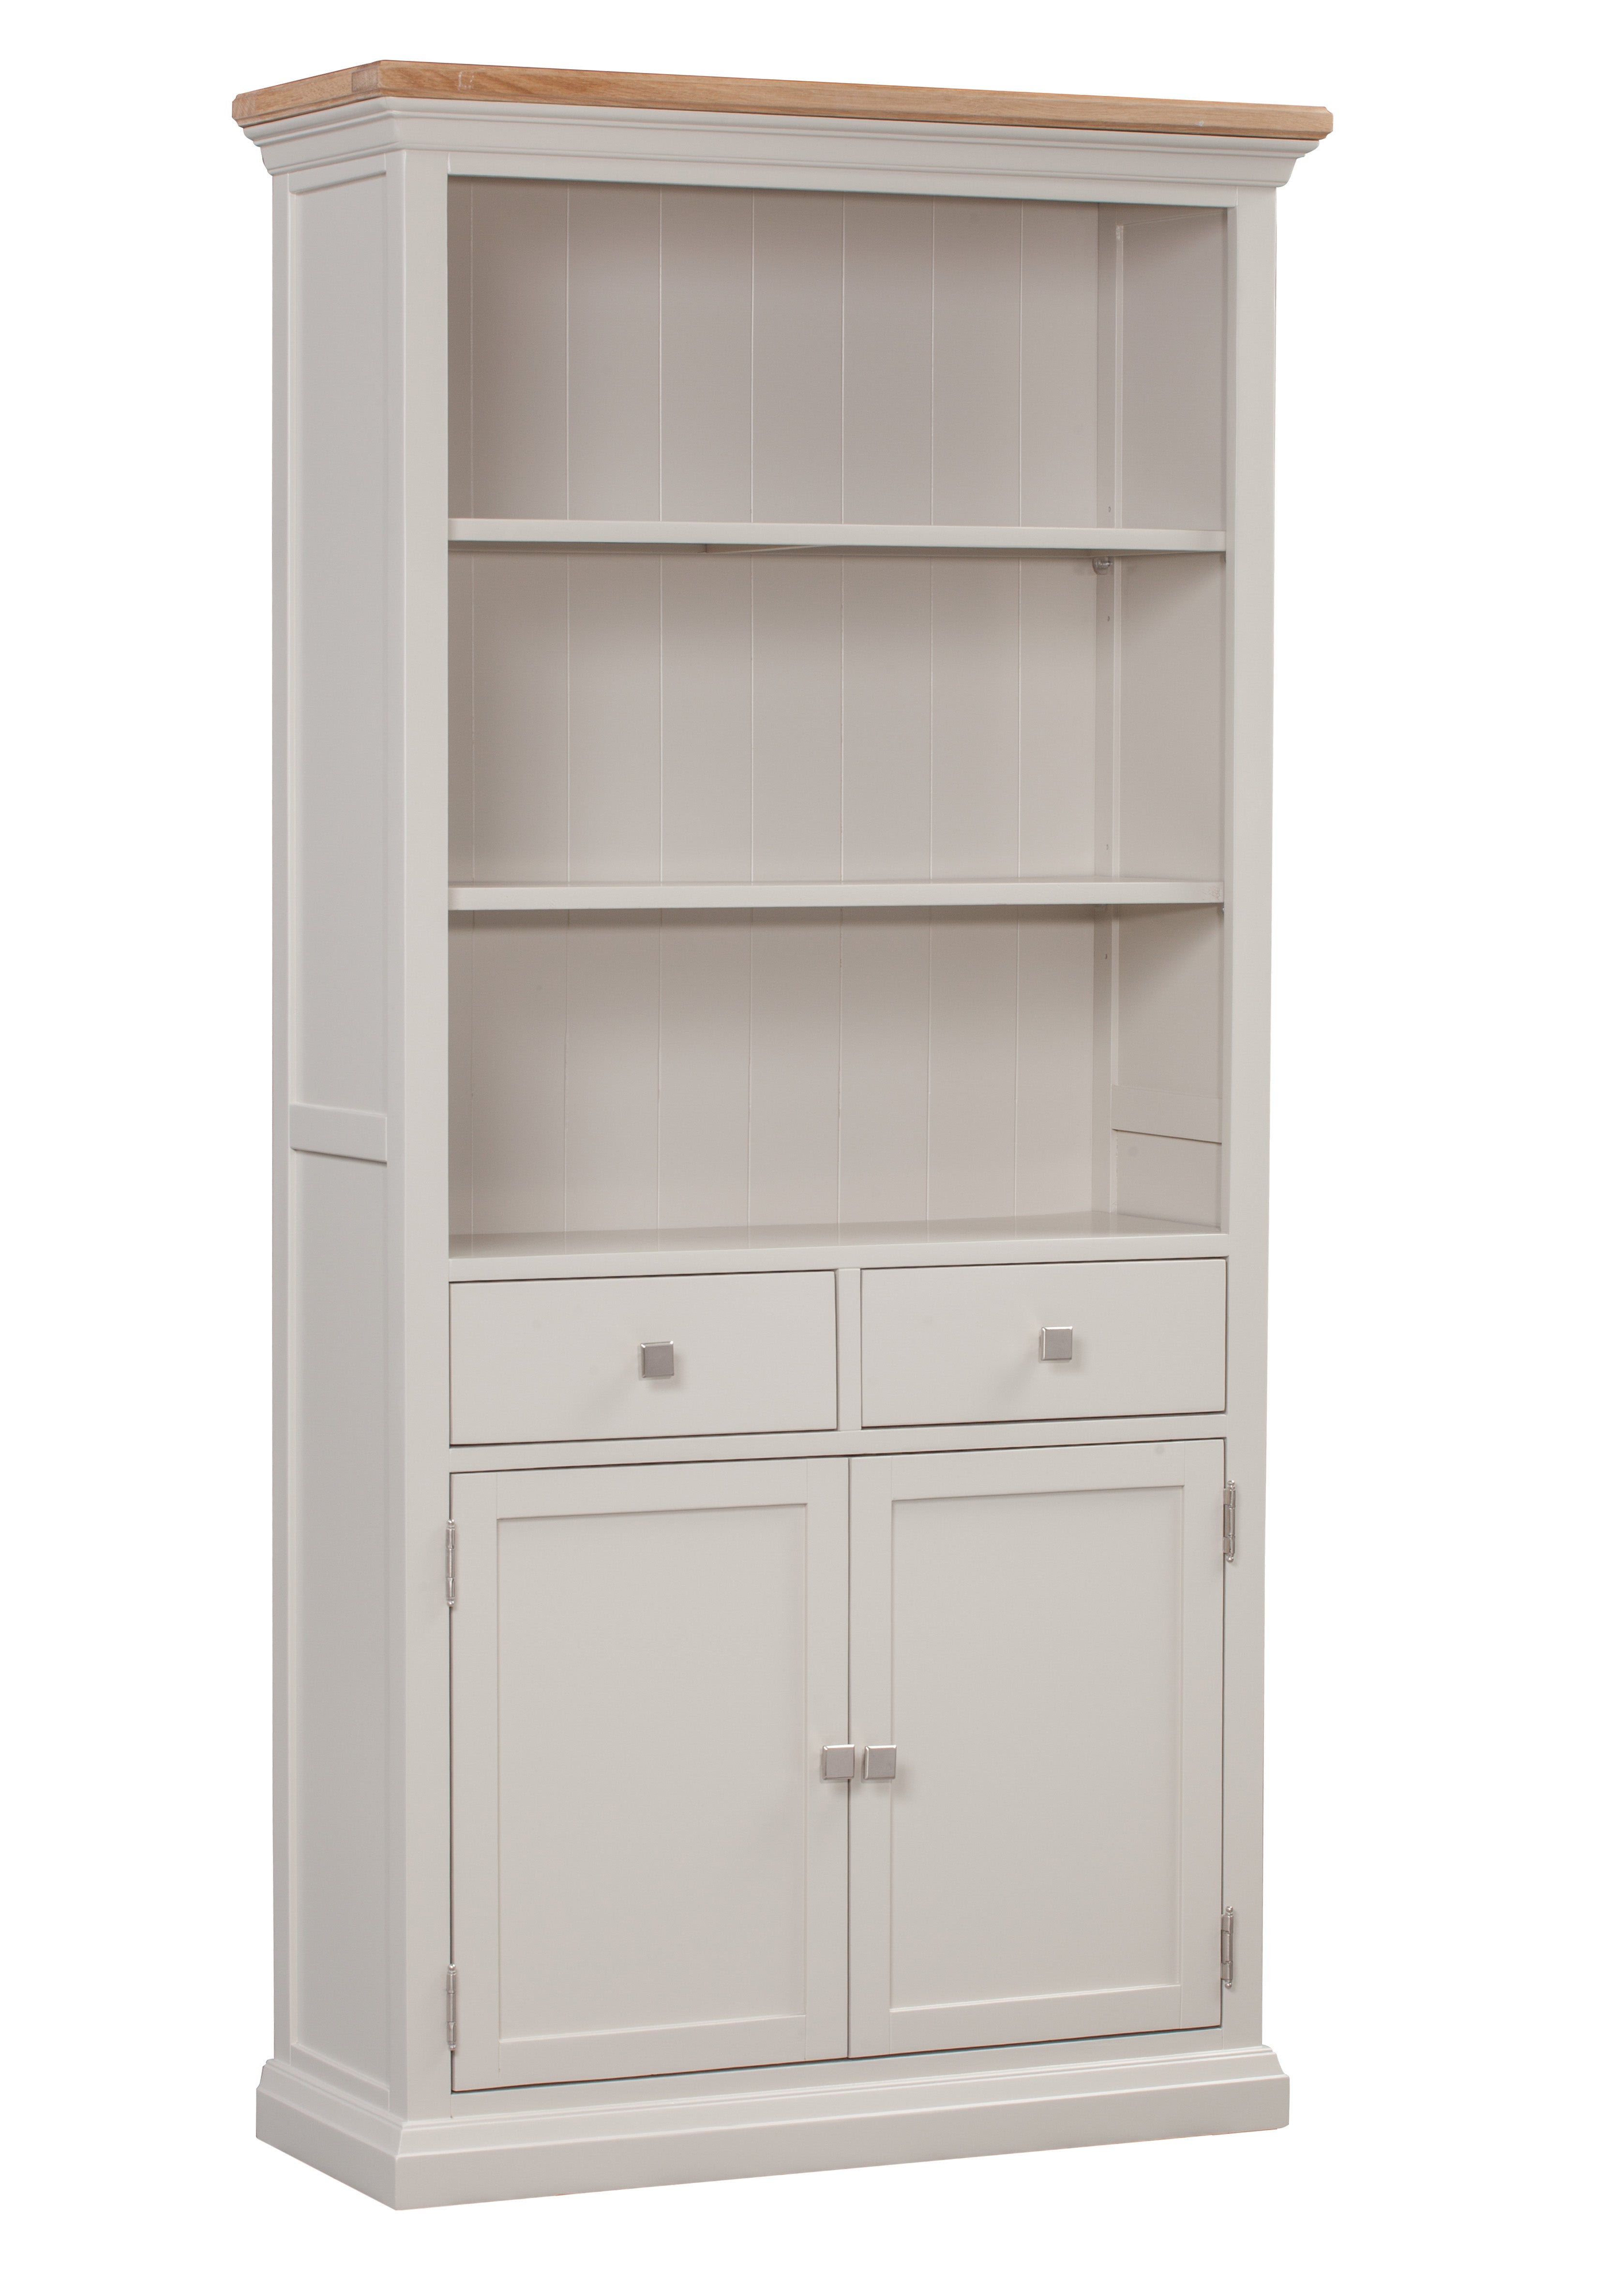 Twemlow Large Bookcase - Painted in Farrow & Ball Paint